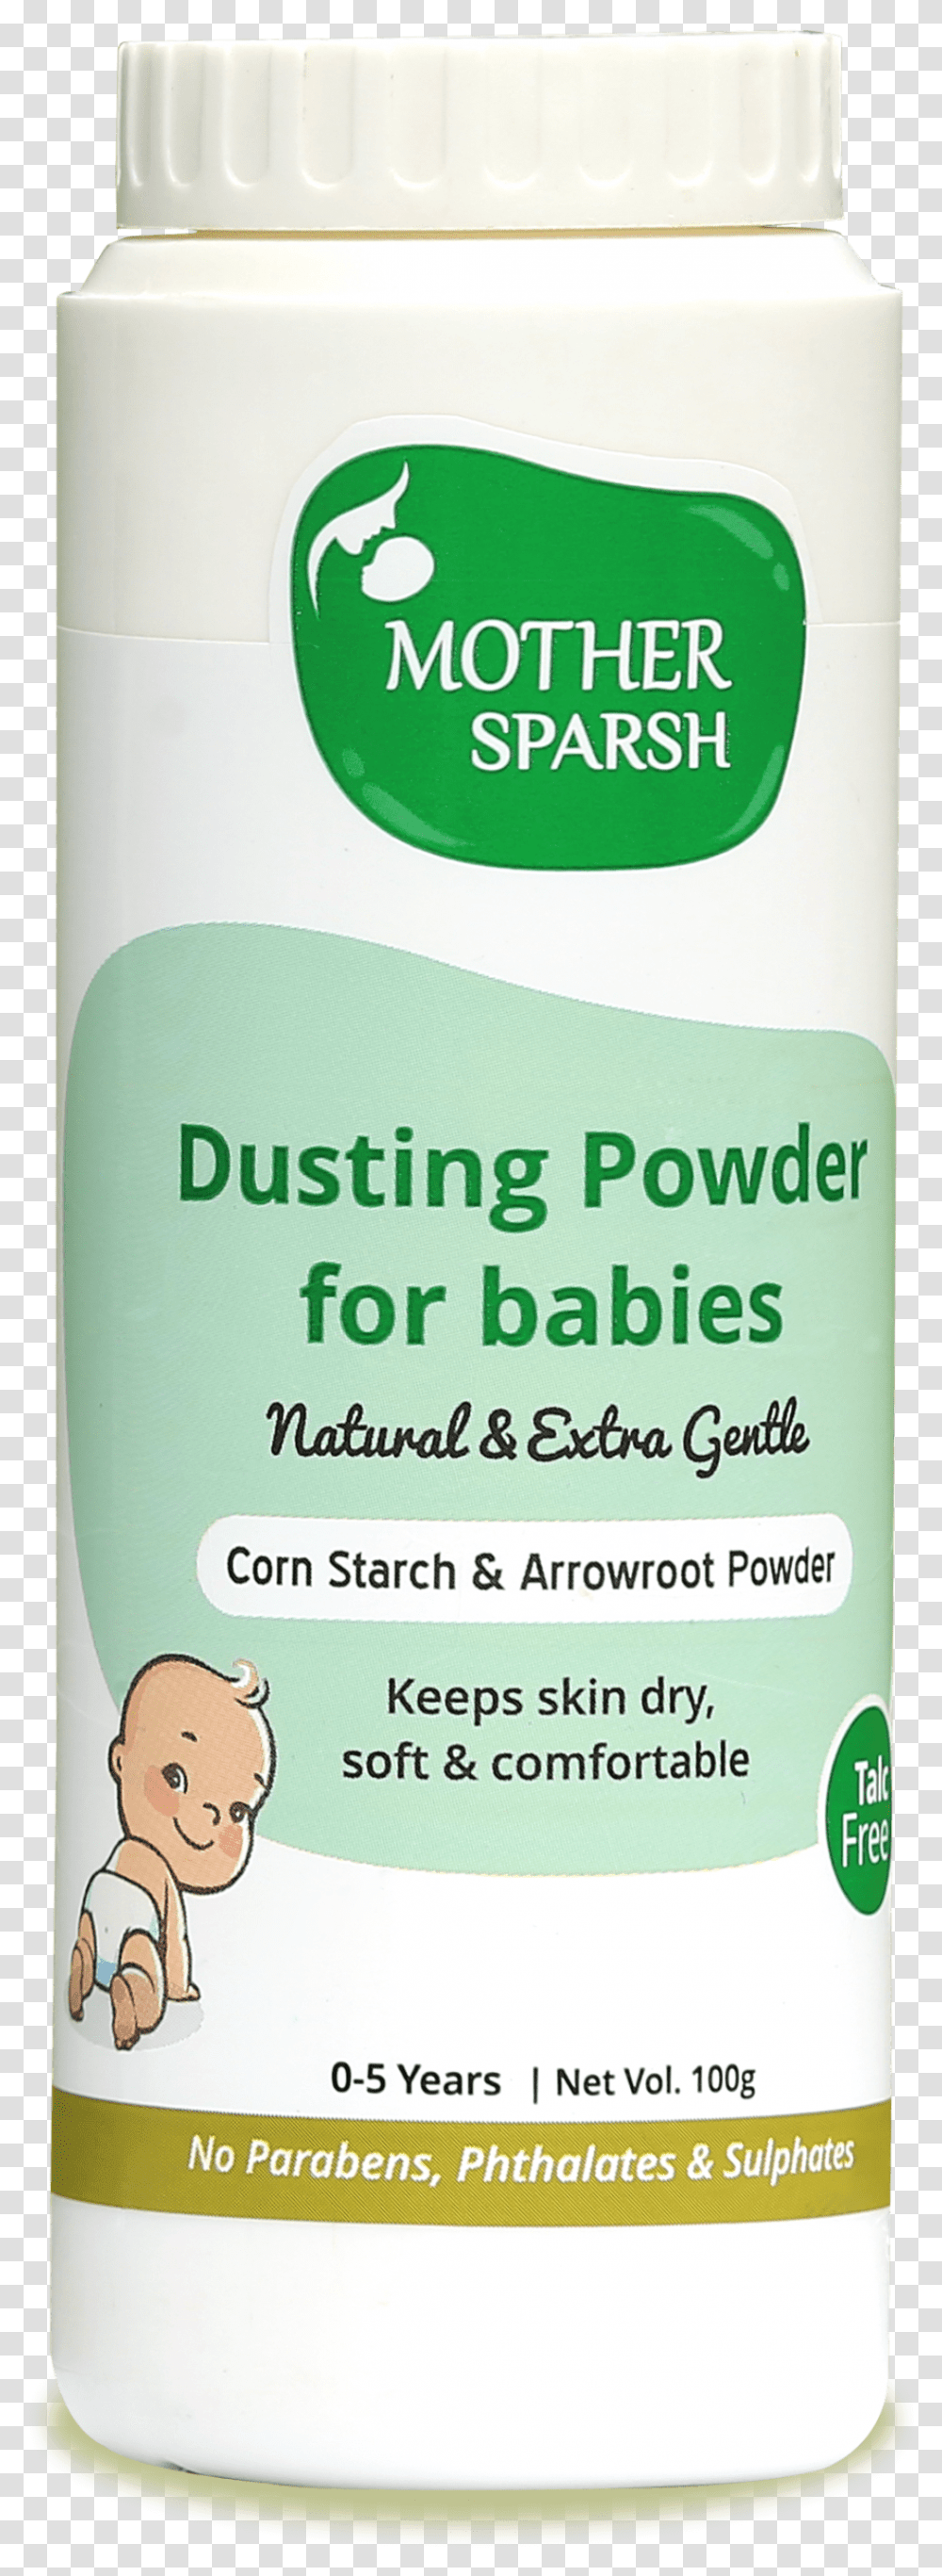 Mother Sparsh Best Baby Powder Wonderparenting Poster, Bottle, Cosmetics, Shampoo, Mobile Phone Transparent Png